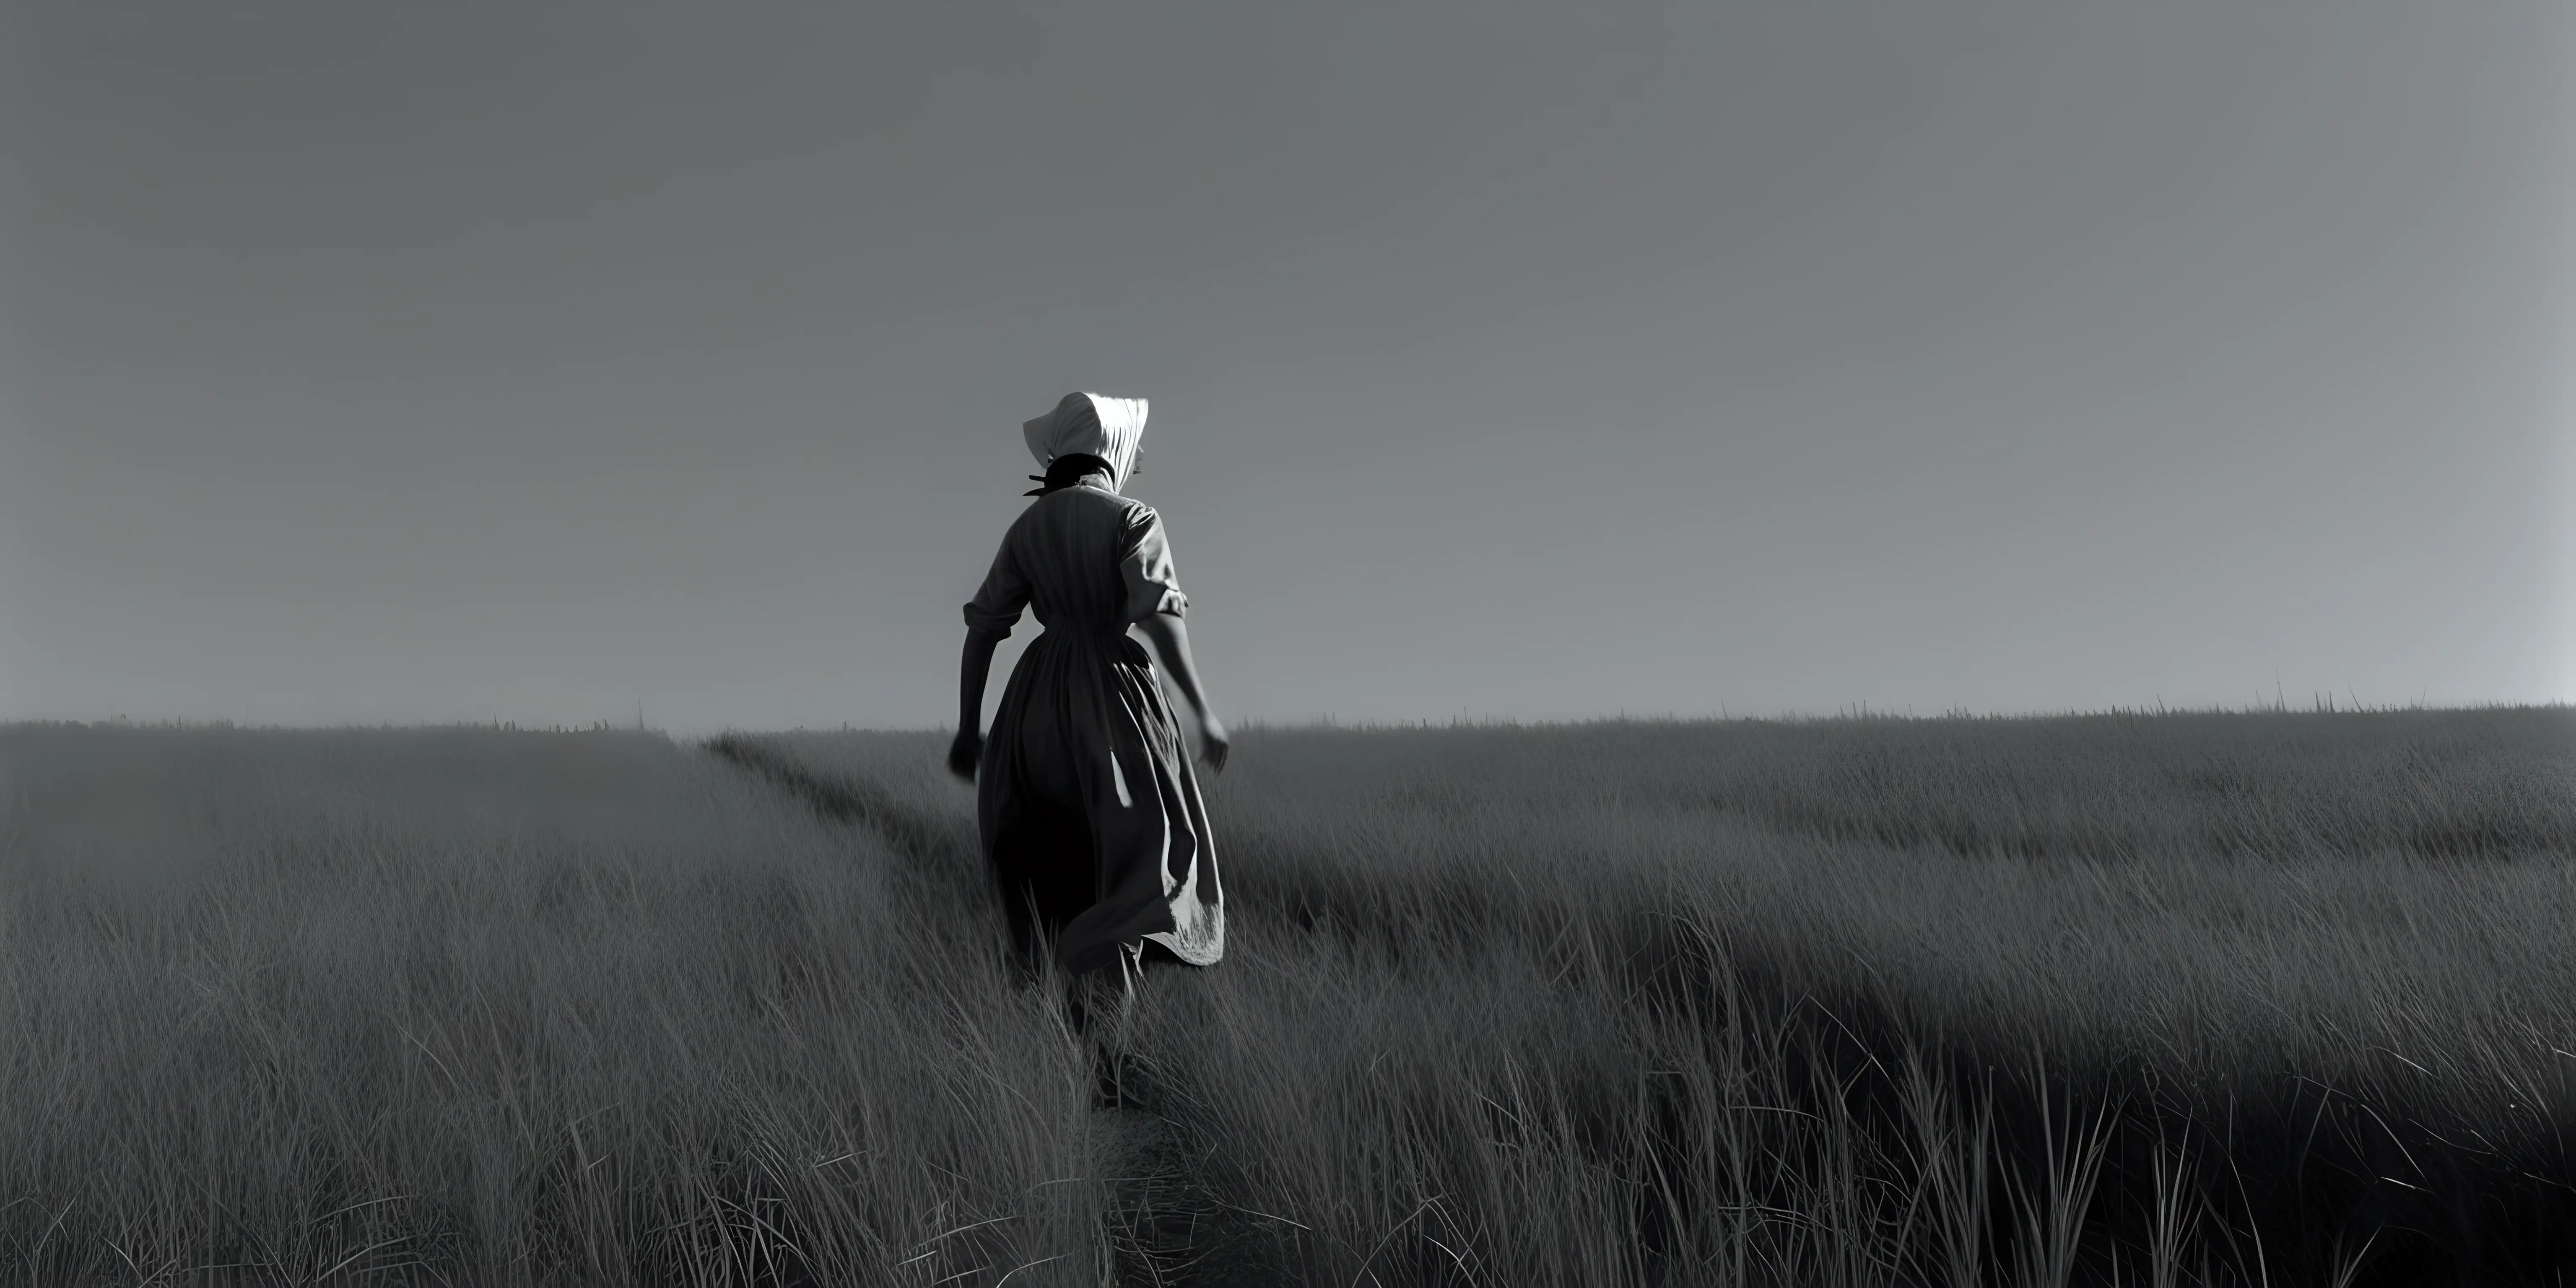 Pioneer Womans Bold Journey Across the Prairie in Monochrome